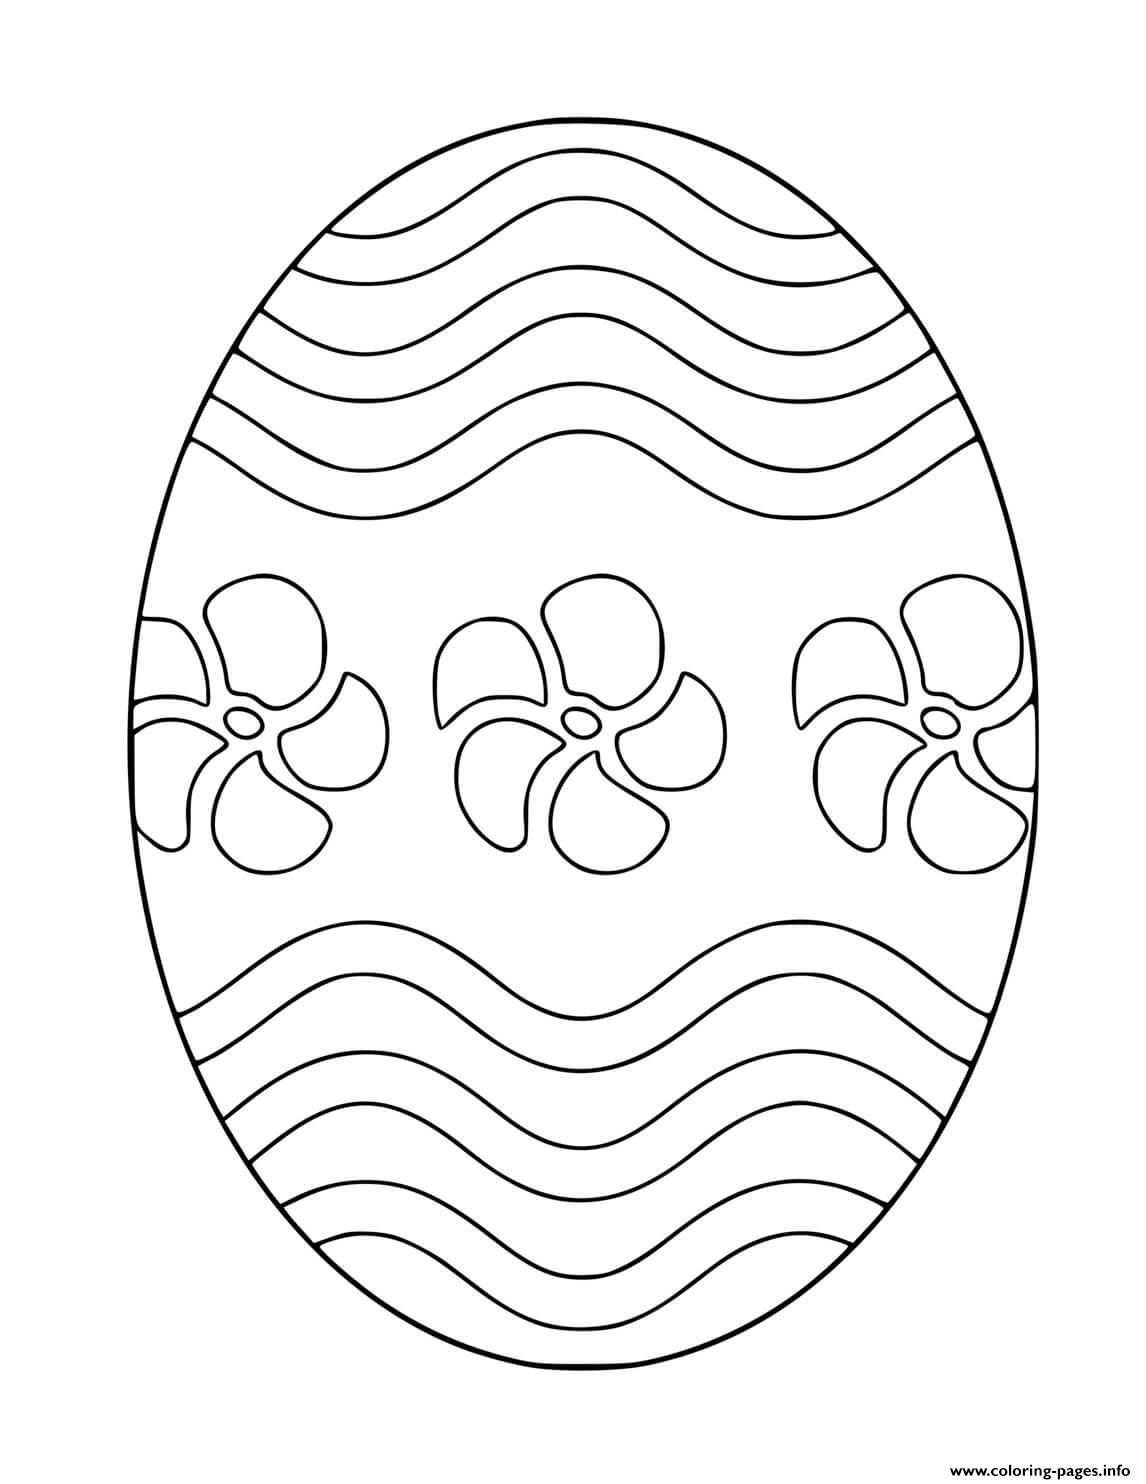 Simple Easter Egg coloring